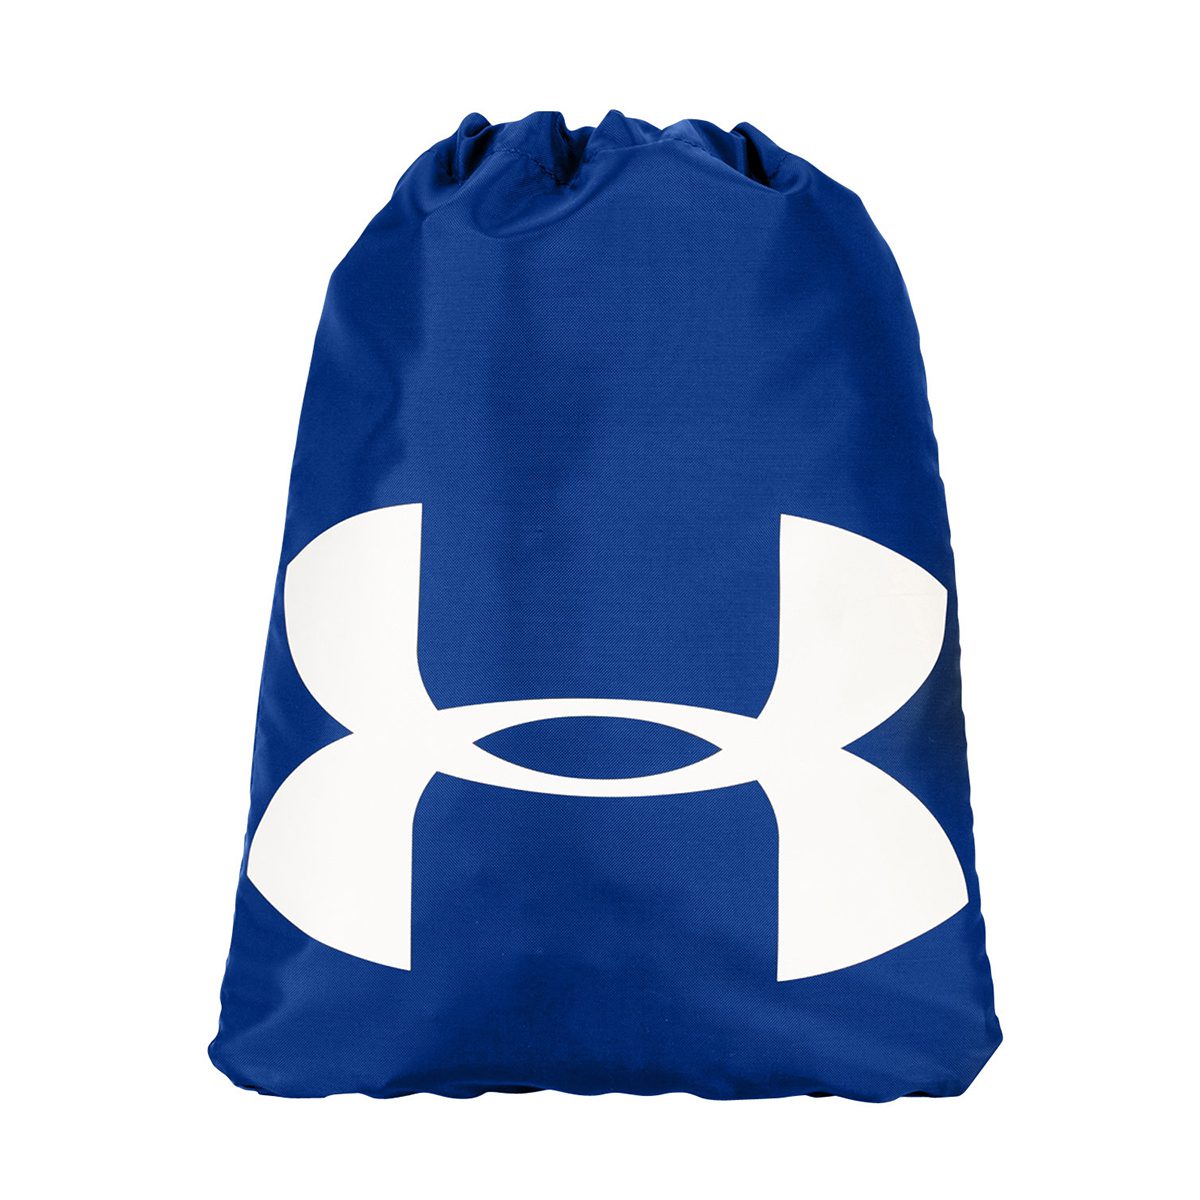 UNDER ARMOUR® Ozsee Sackpack #1240539 Royal Blue